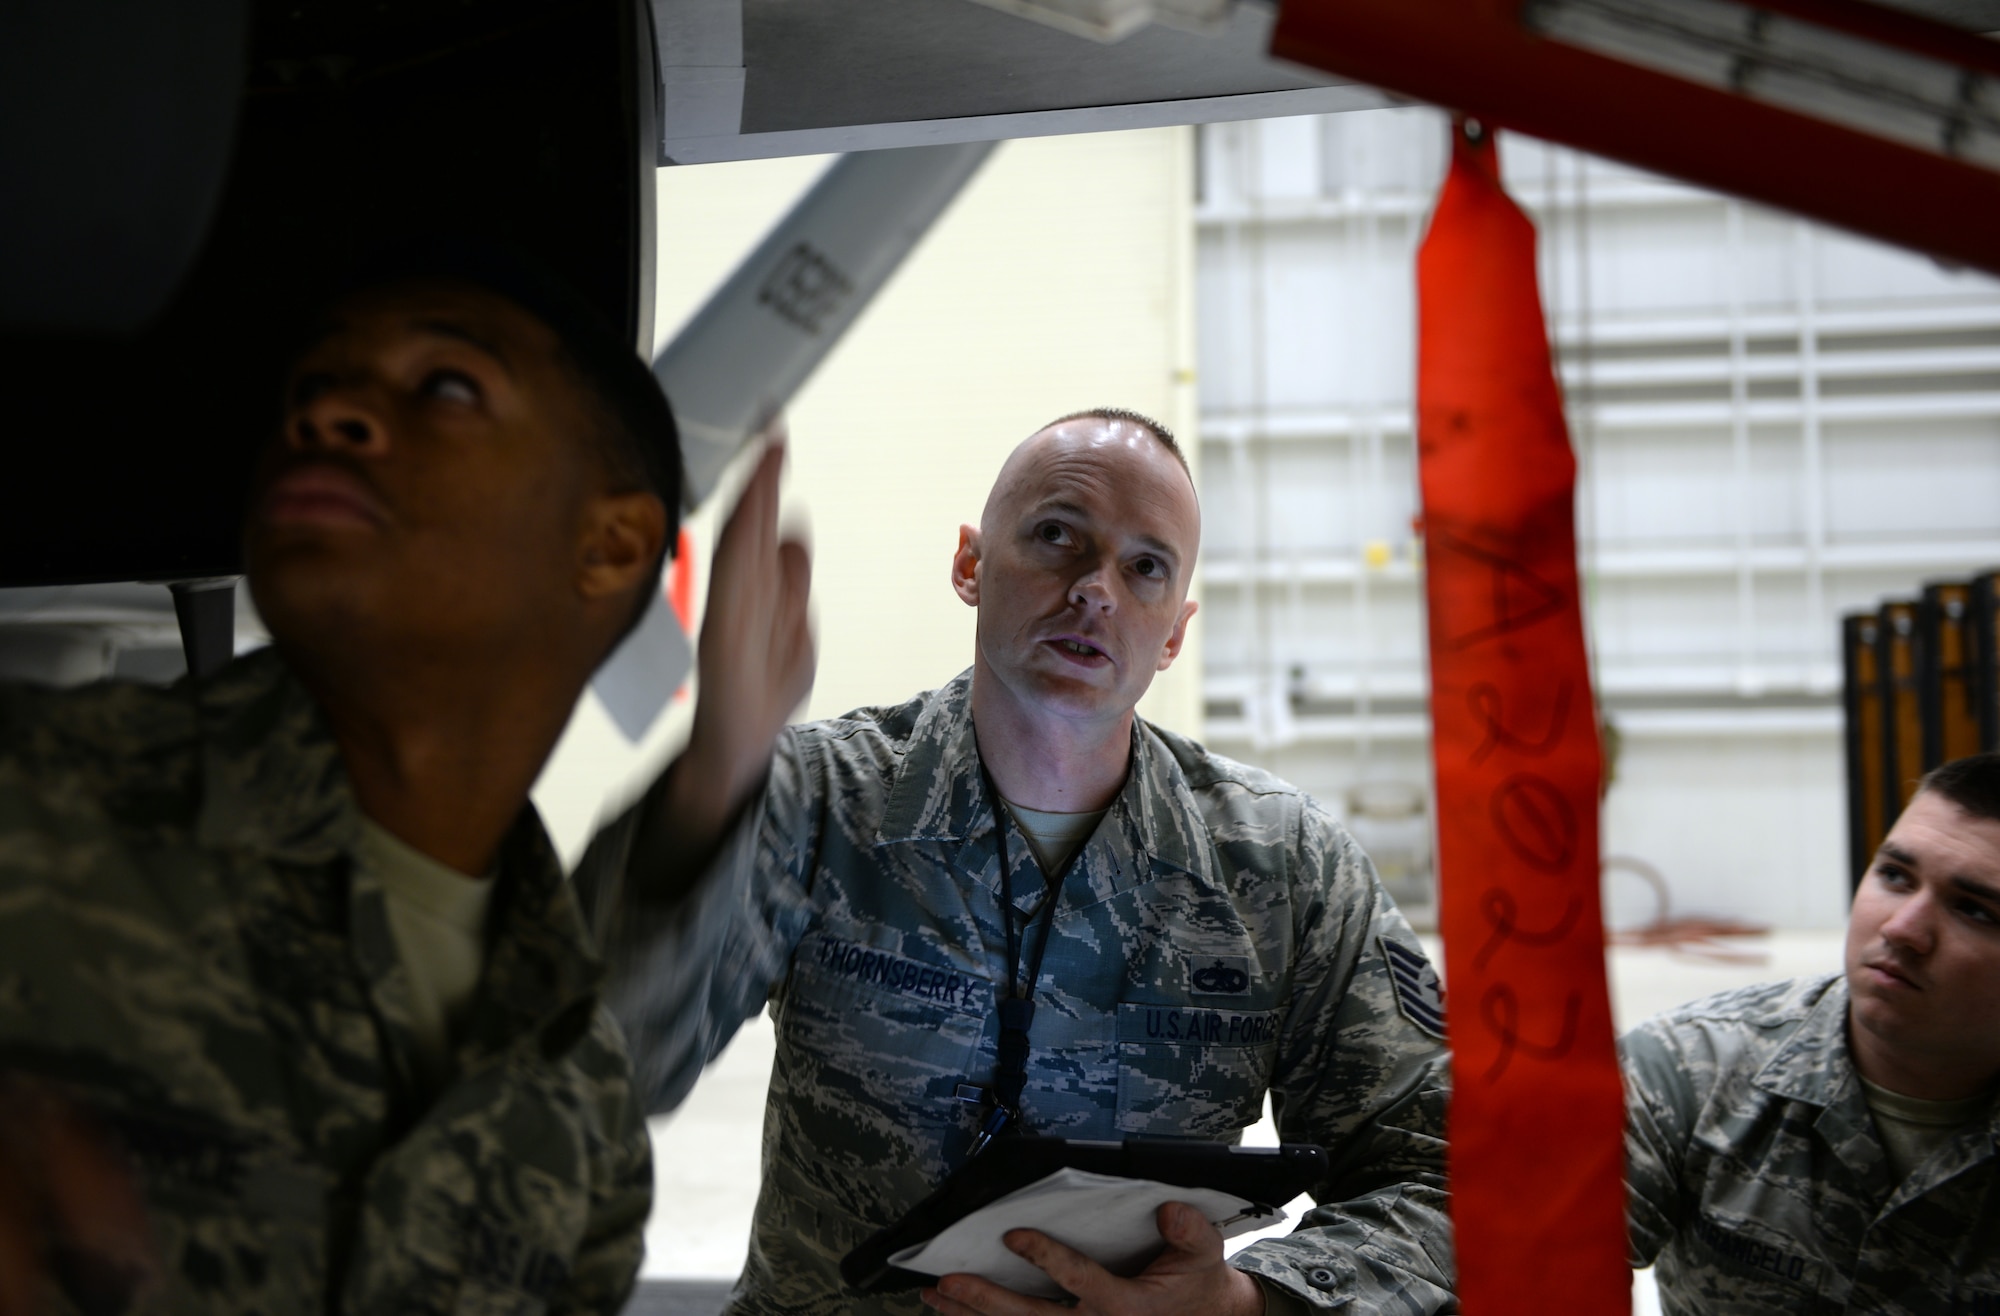 Tech. Sgt. Randy Thornsberry Jr. (Center), 372nd Training Squadron Detachment 21, maintenance instructor, instructs his students during a maintenance inspection of an RQ-4 Global Hawk  Jan. 20, 2015, at Beale Air Force Base, Calif. Thornsberry is tasked with teaching the first class of the RQ-4 remotely piloted aircraft maintenance course. (U.S. Air Force photo by Senior Airman Bobby Cummings/Released)